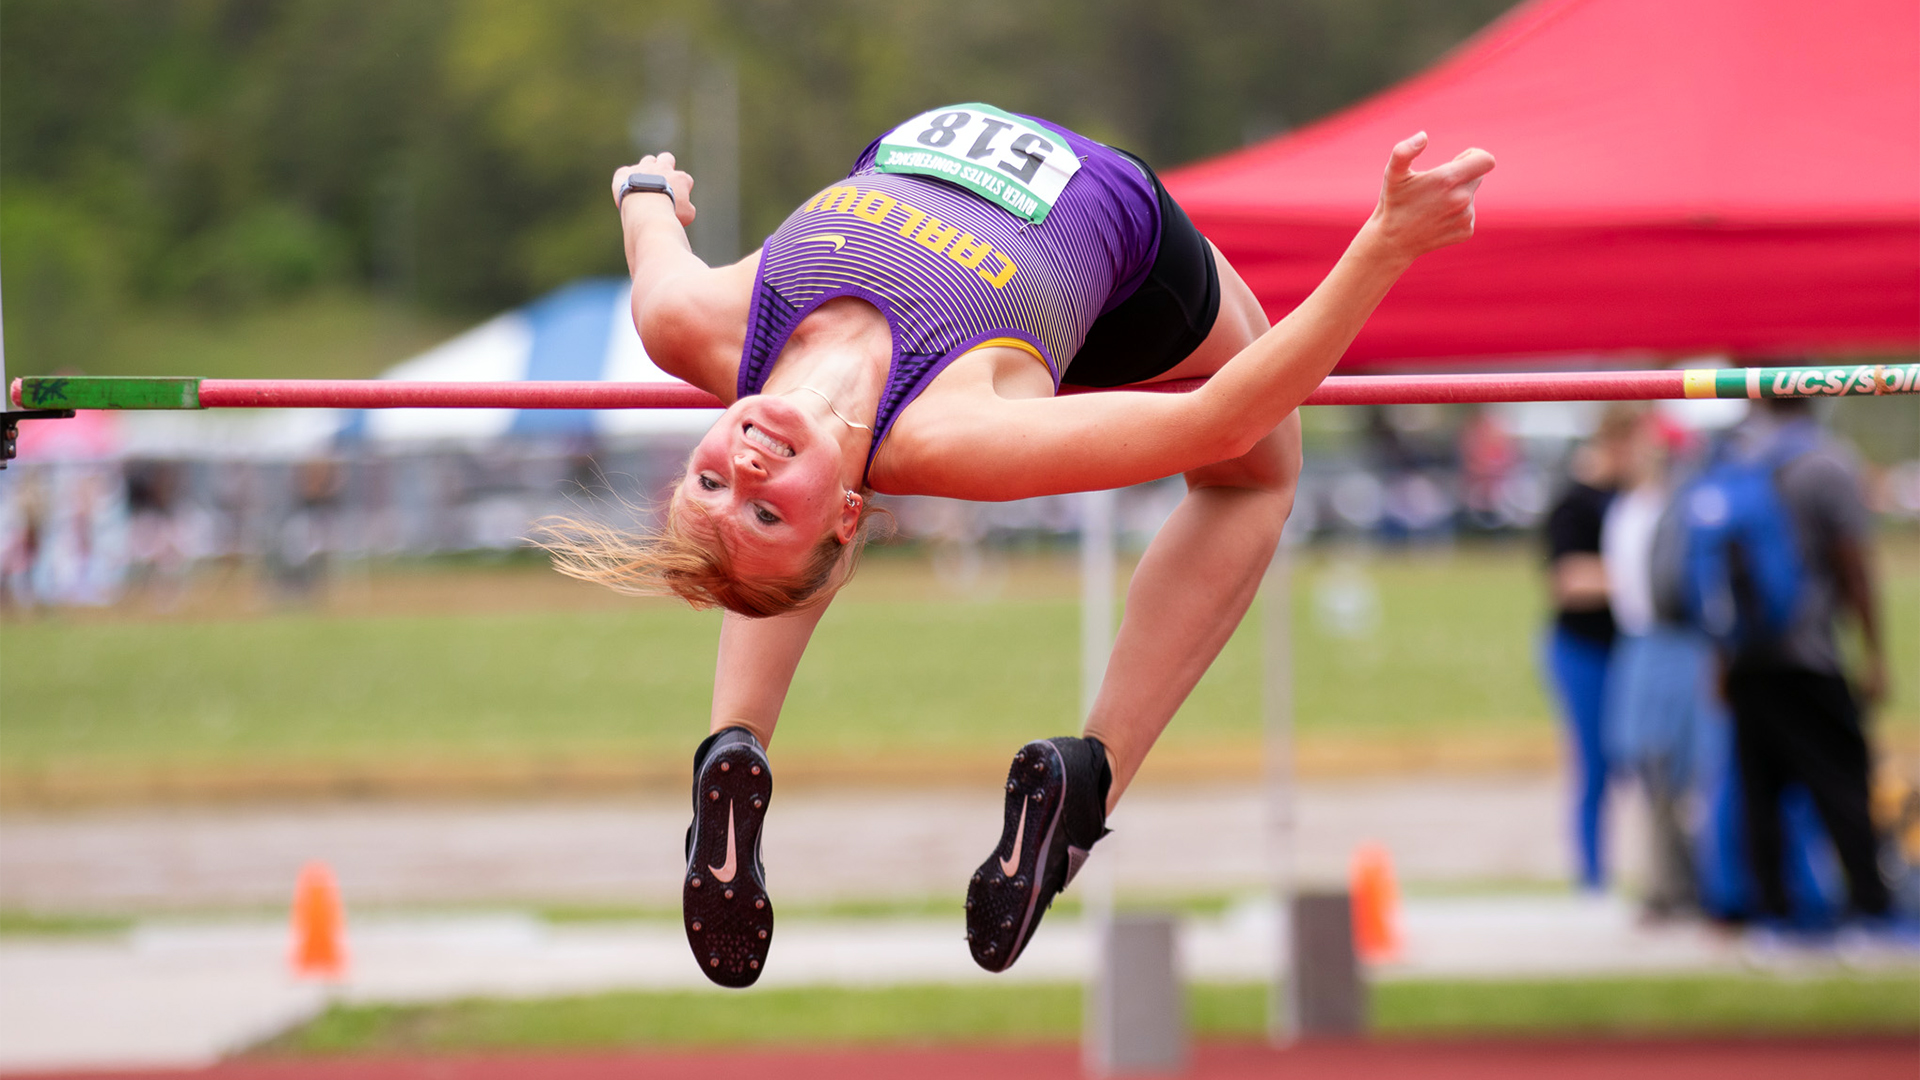 Christina Smith scored a top-10 finish in high jump. Archived outdoor photo by Justyce Marcum.